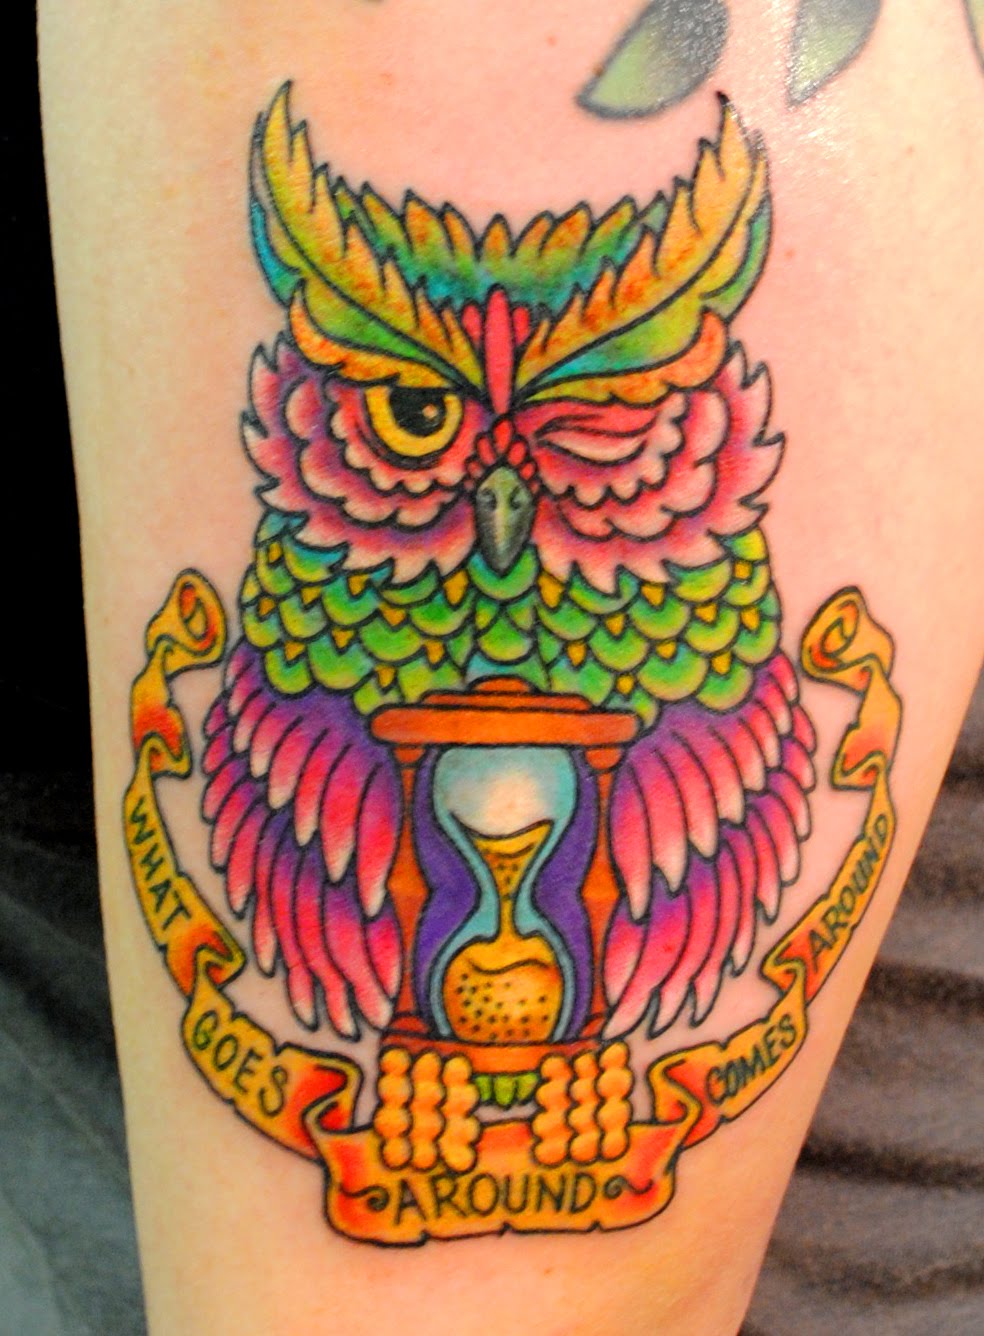 Colorful Owl With Hourglass And Banner Tattoo Design For Half Sleeve